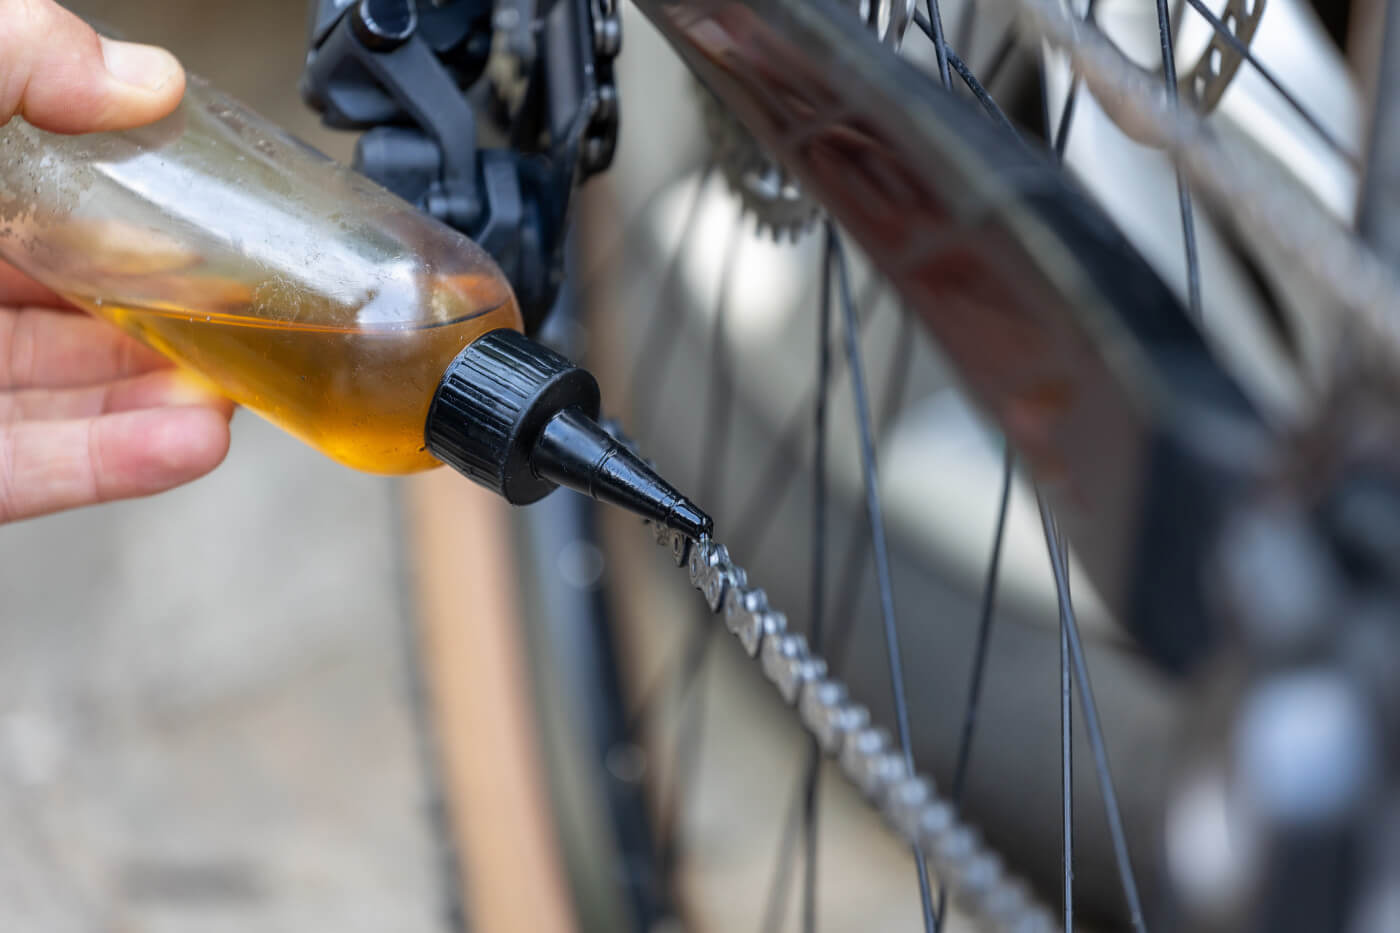 Tech Tips  HOW TO PROPERLY LUBE YOUR CHAIN? 